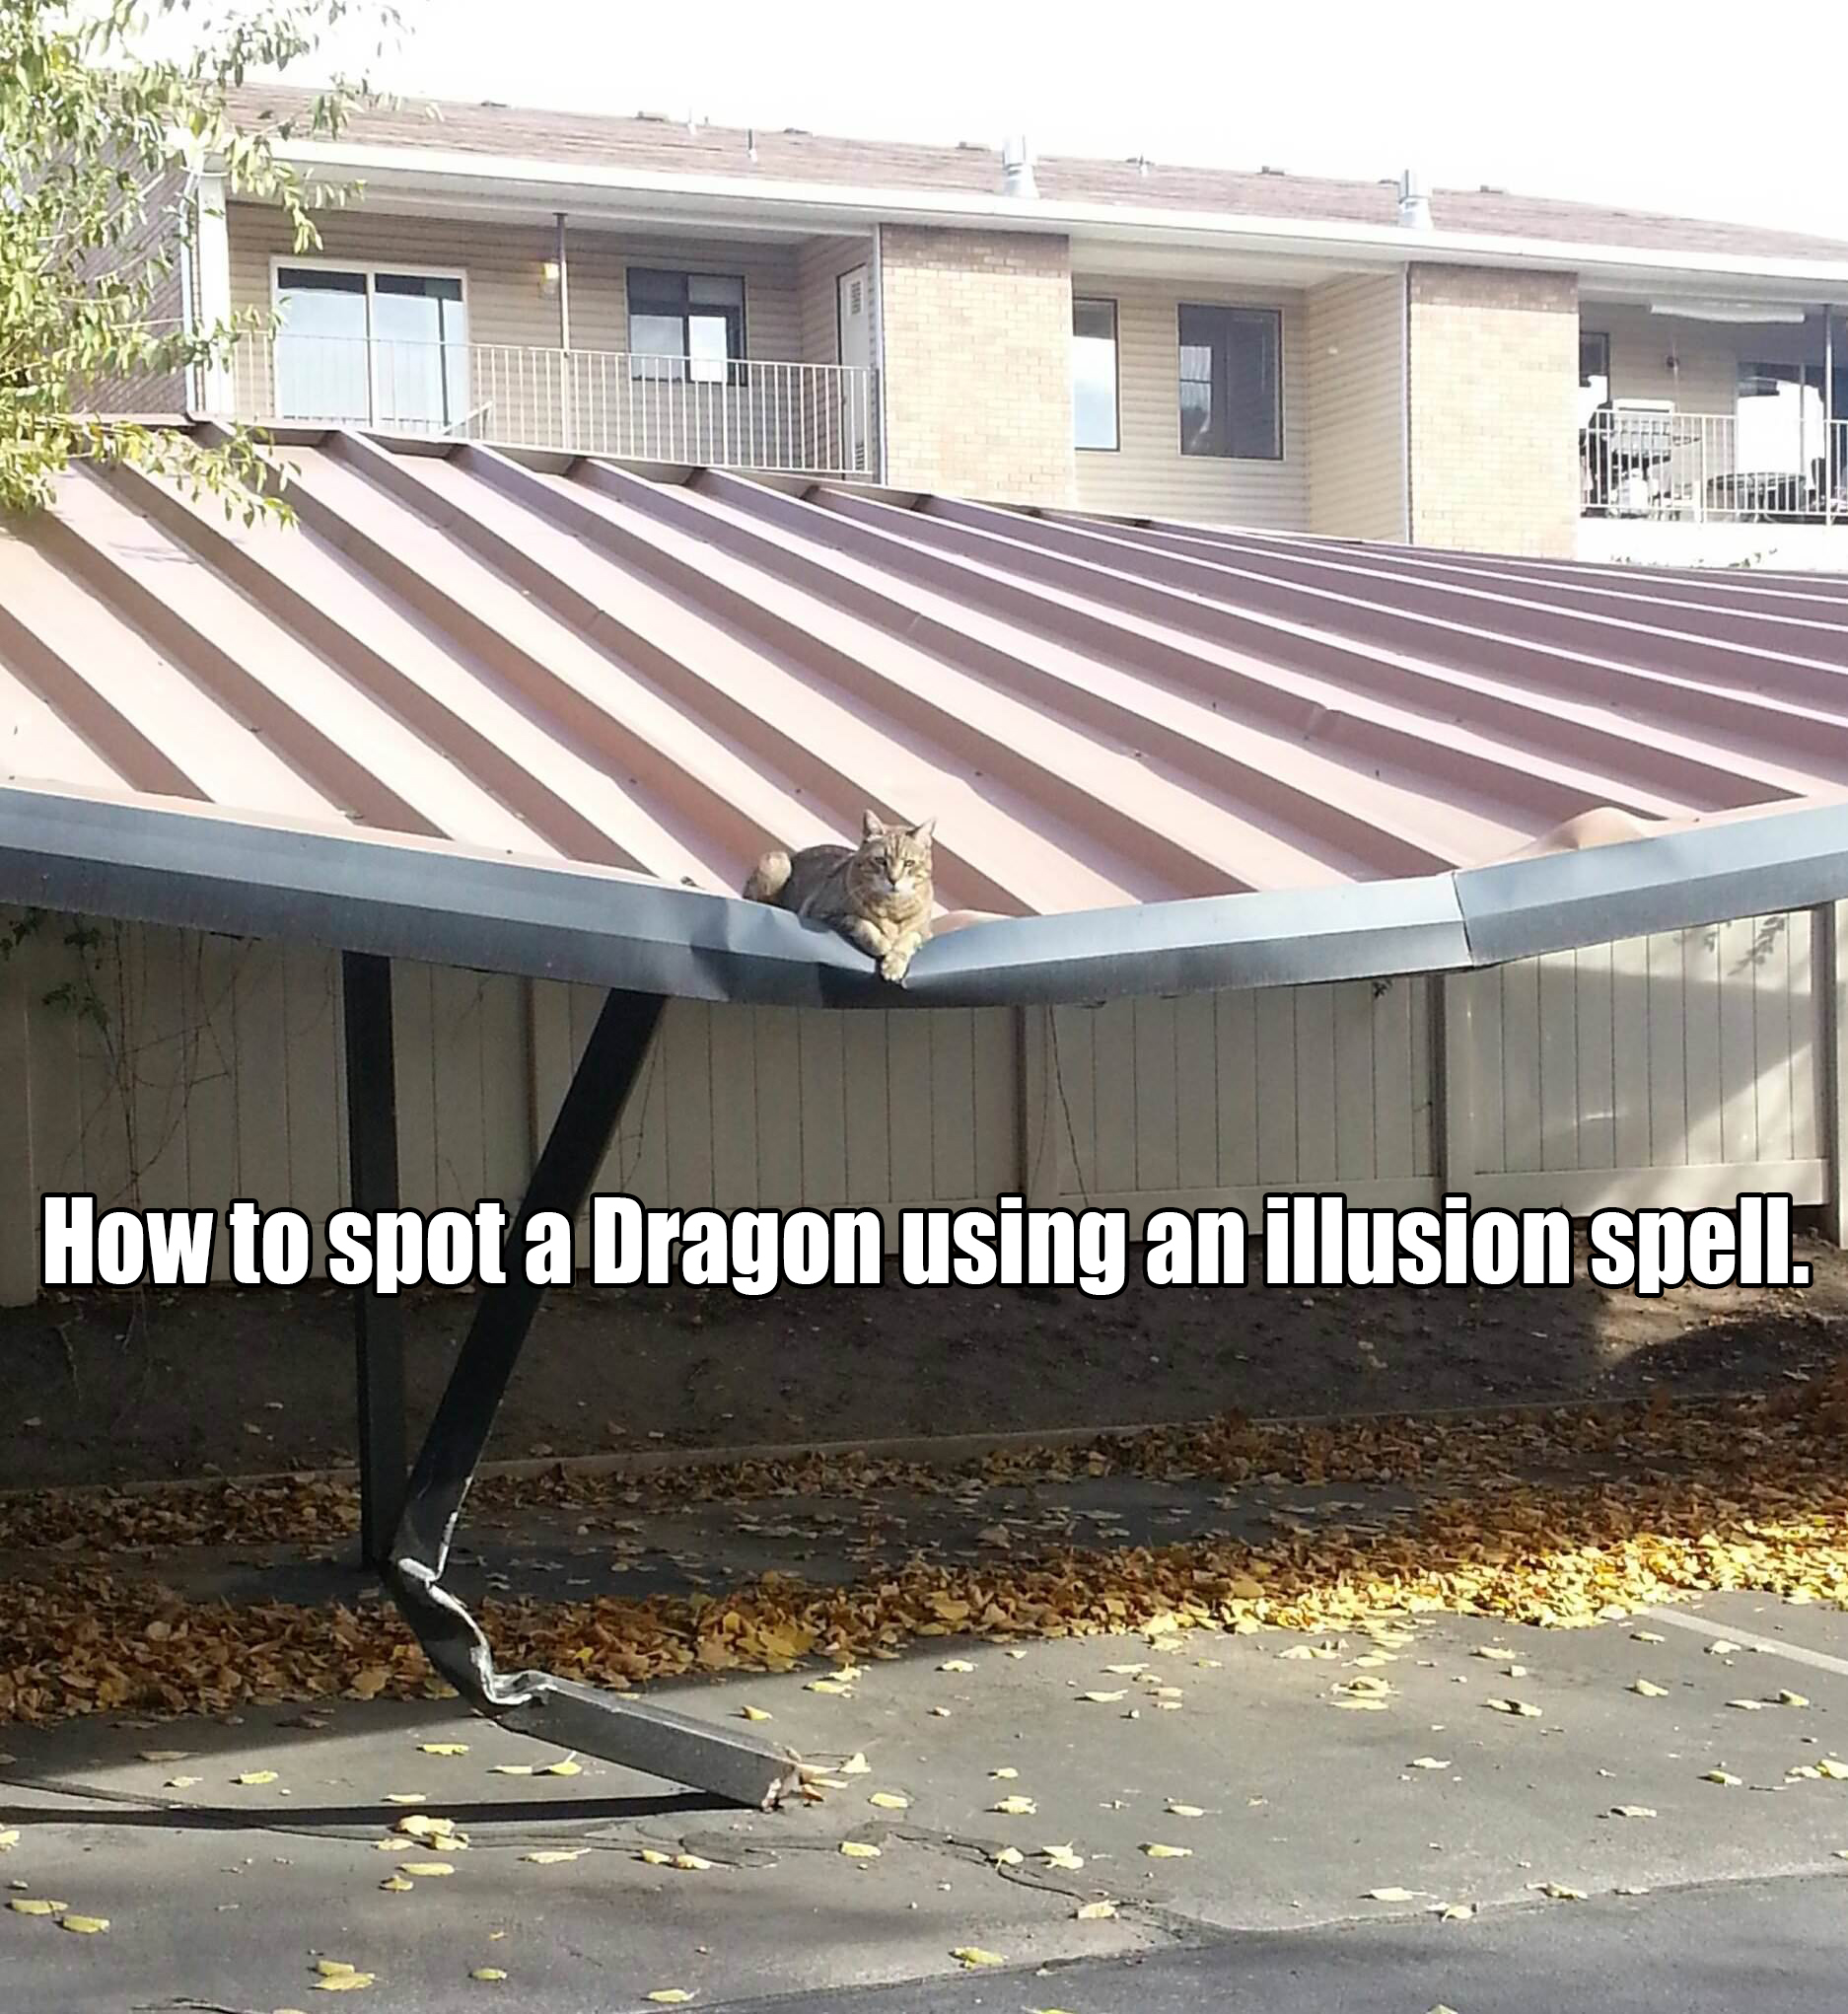 dragon illusion spell - Me How to spot a Dragon using an illusion spell.